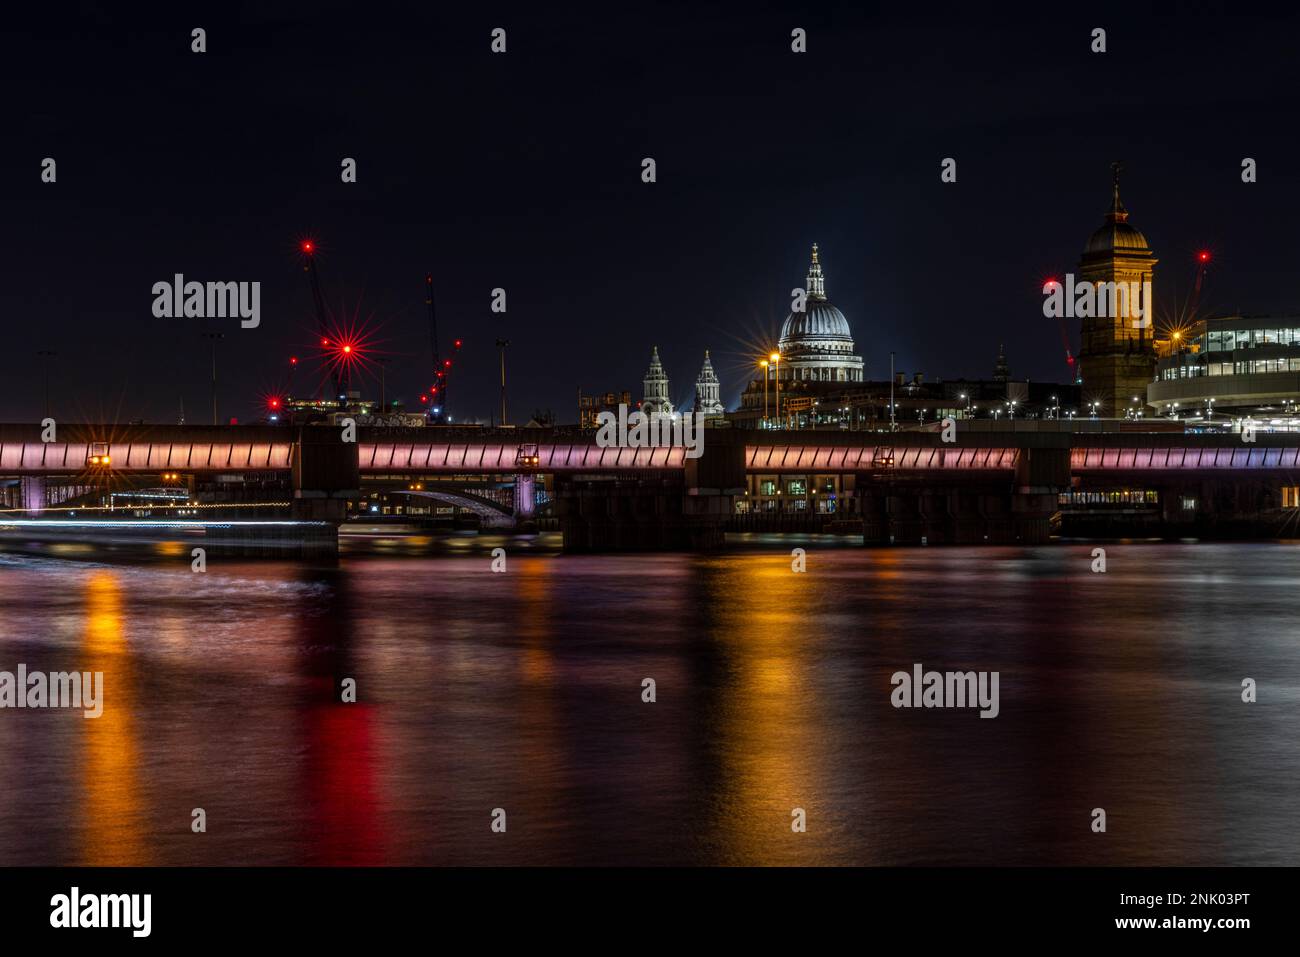 River Thames, Cannon Street Railway Bridge, St Paul's Cathedral and the City at night, London, England, UK Stock Photo